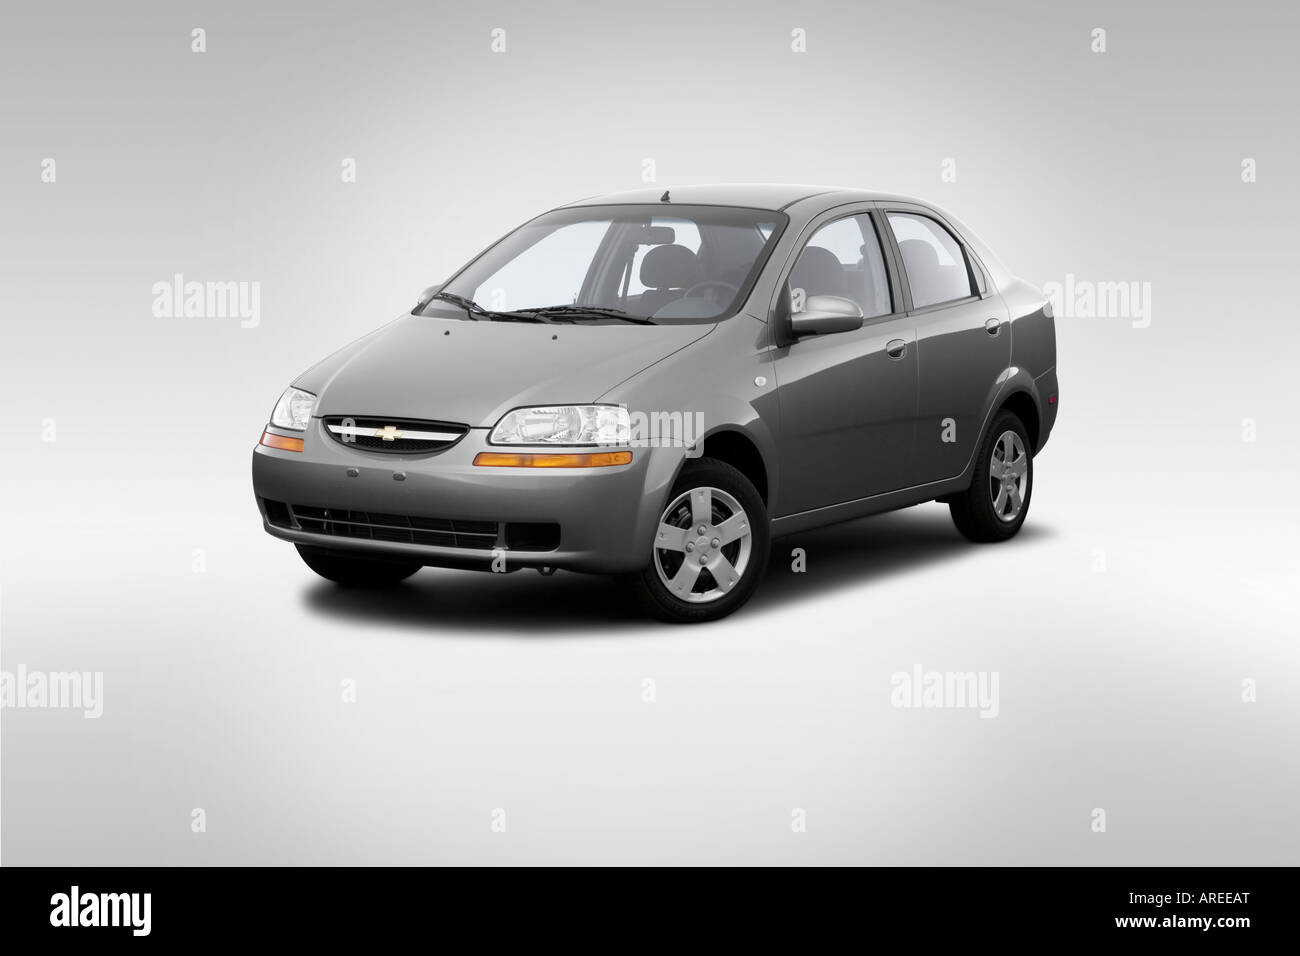 2006 Chevrolet Aveo SV in Gray - Front angle view Stock Photo - Alamy